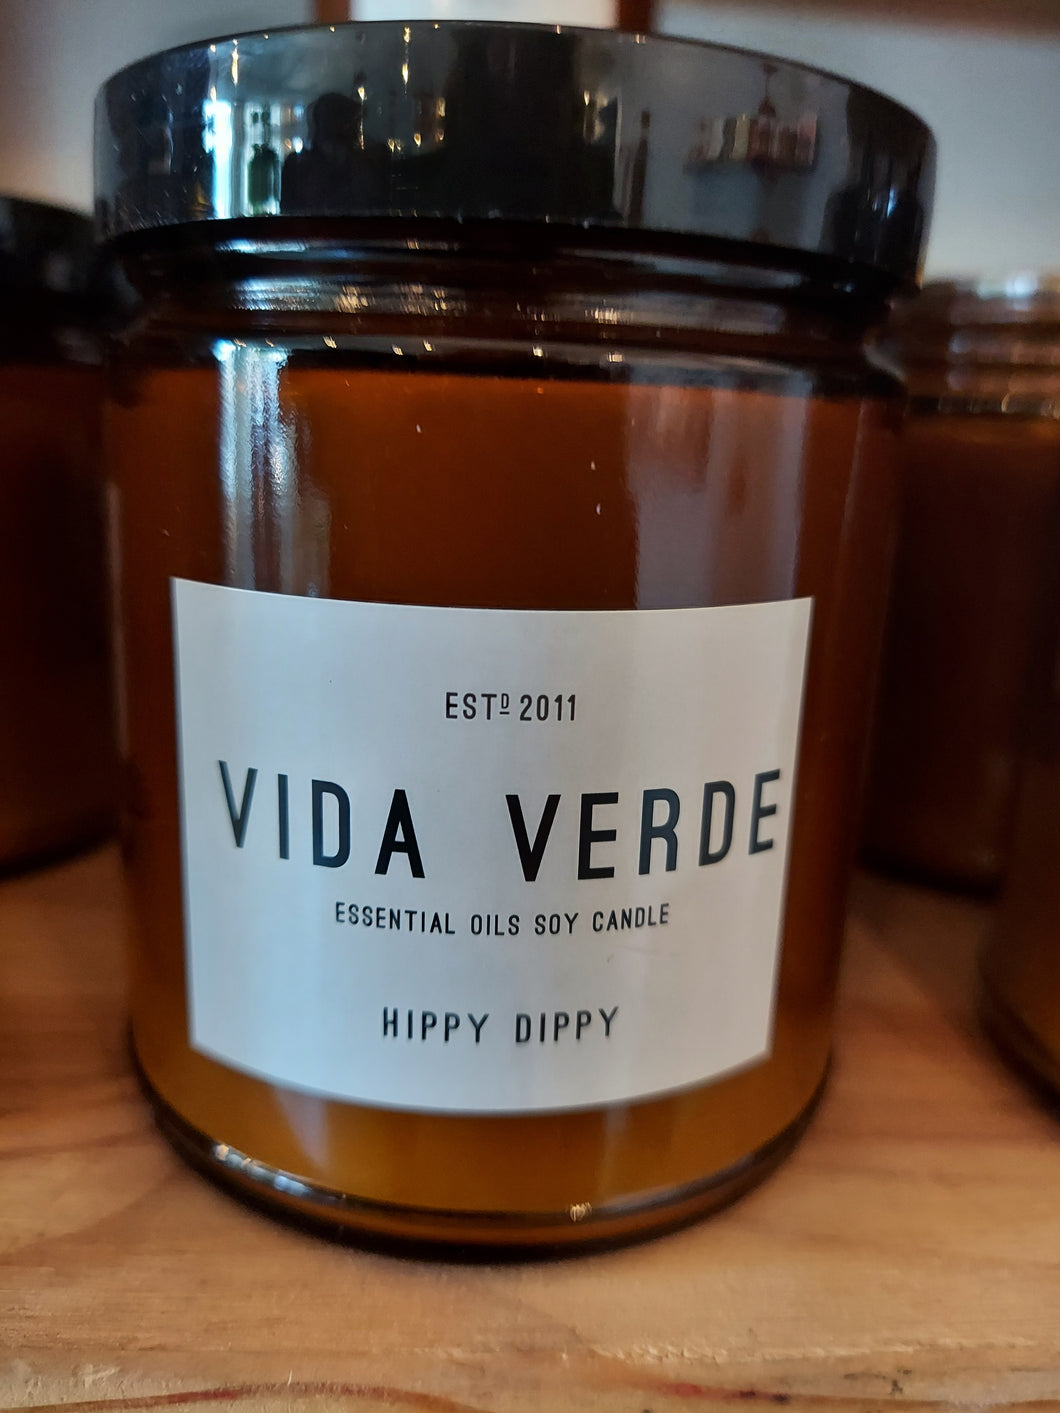 Hippy Dippy: Soy Candle with Essential Oils